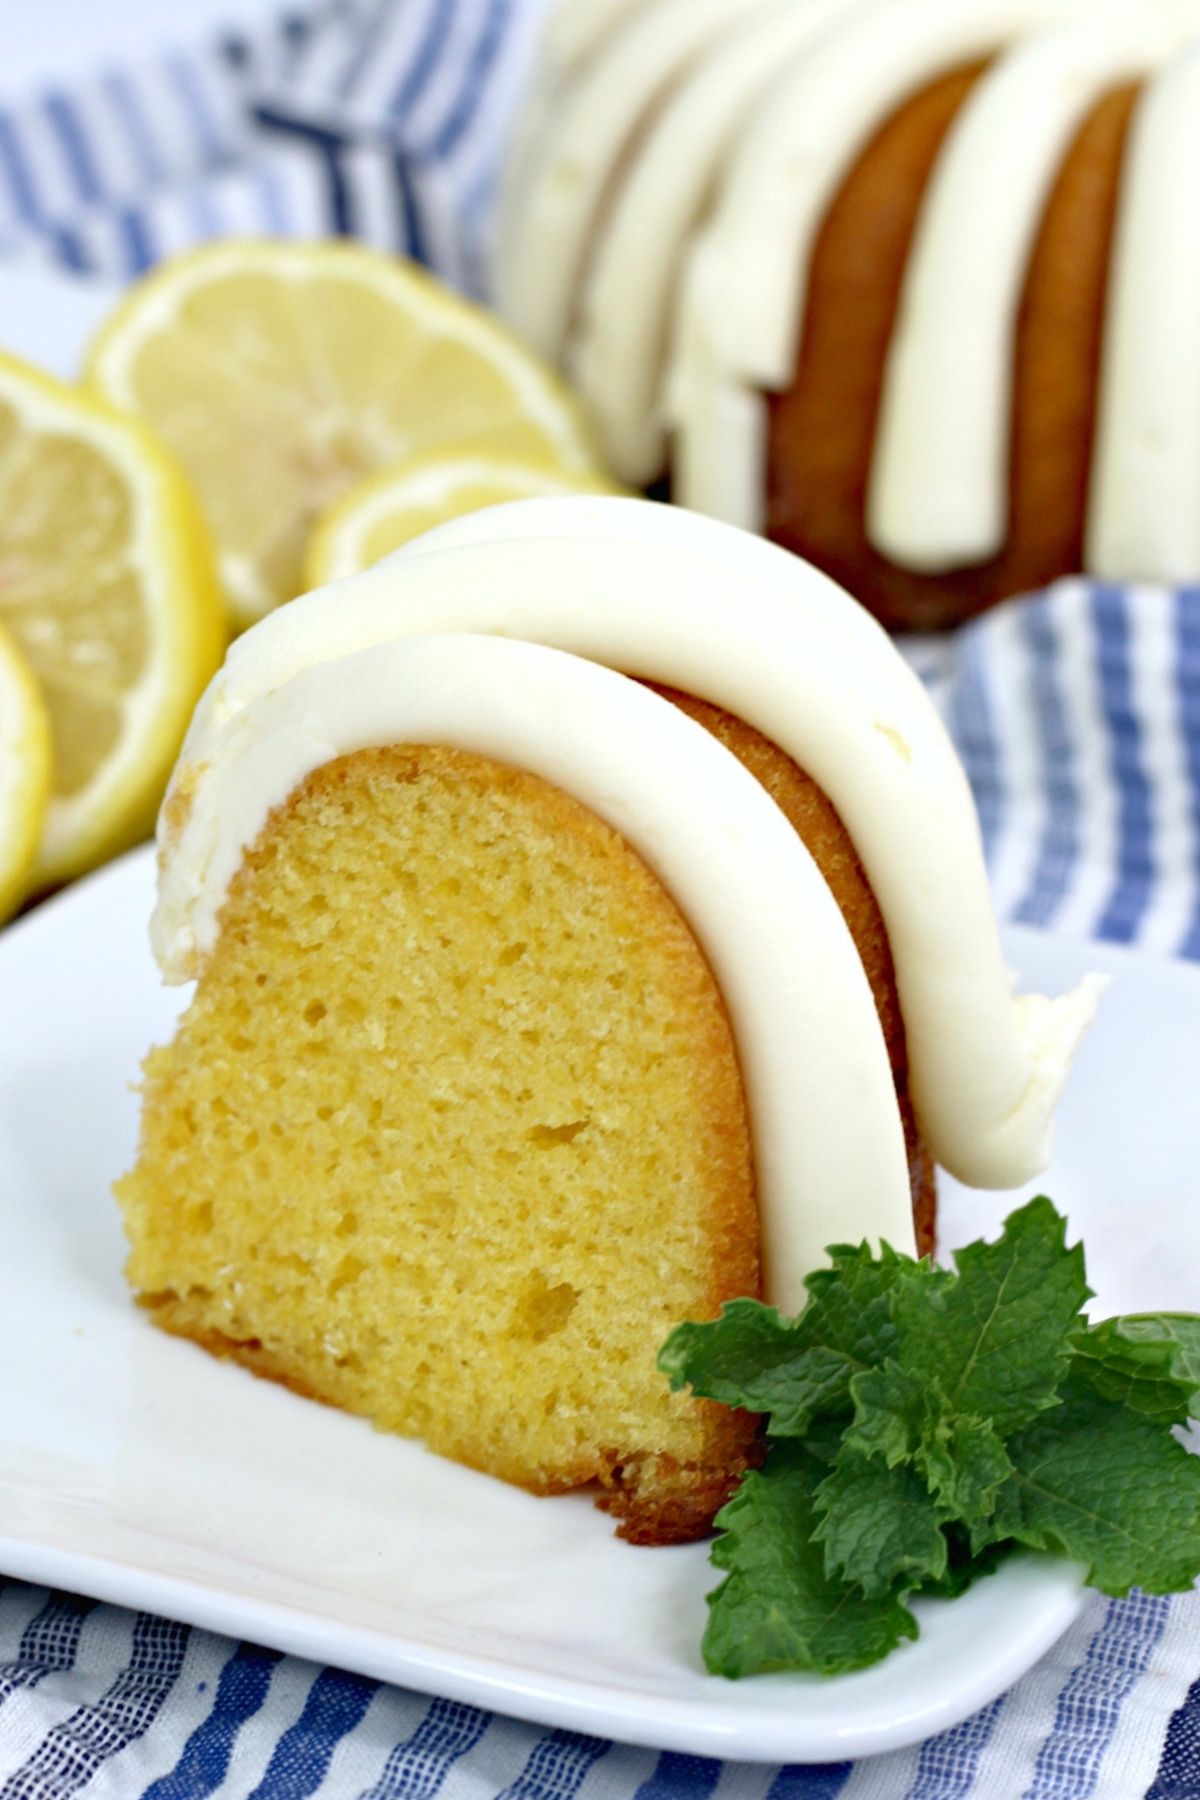 This Copycat Nothing Bundt Cake Lemon Bundt Cake recipe is so good, you won’t know the difference from the real thing! This lemon bundt cake is so delicious and refreshing, it's perfect for warmer weather and pairs so well with tea and coffee on your breaks, supper, or at luncheons.